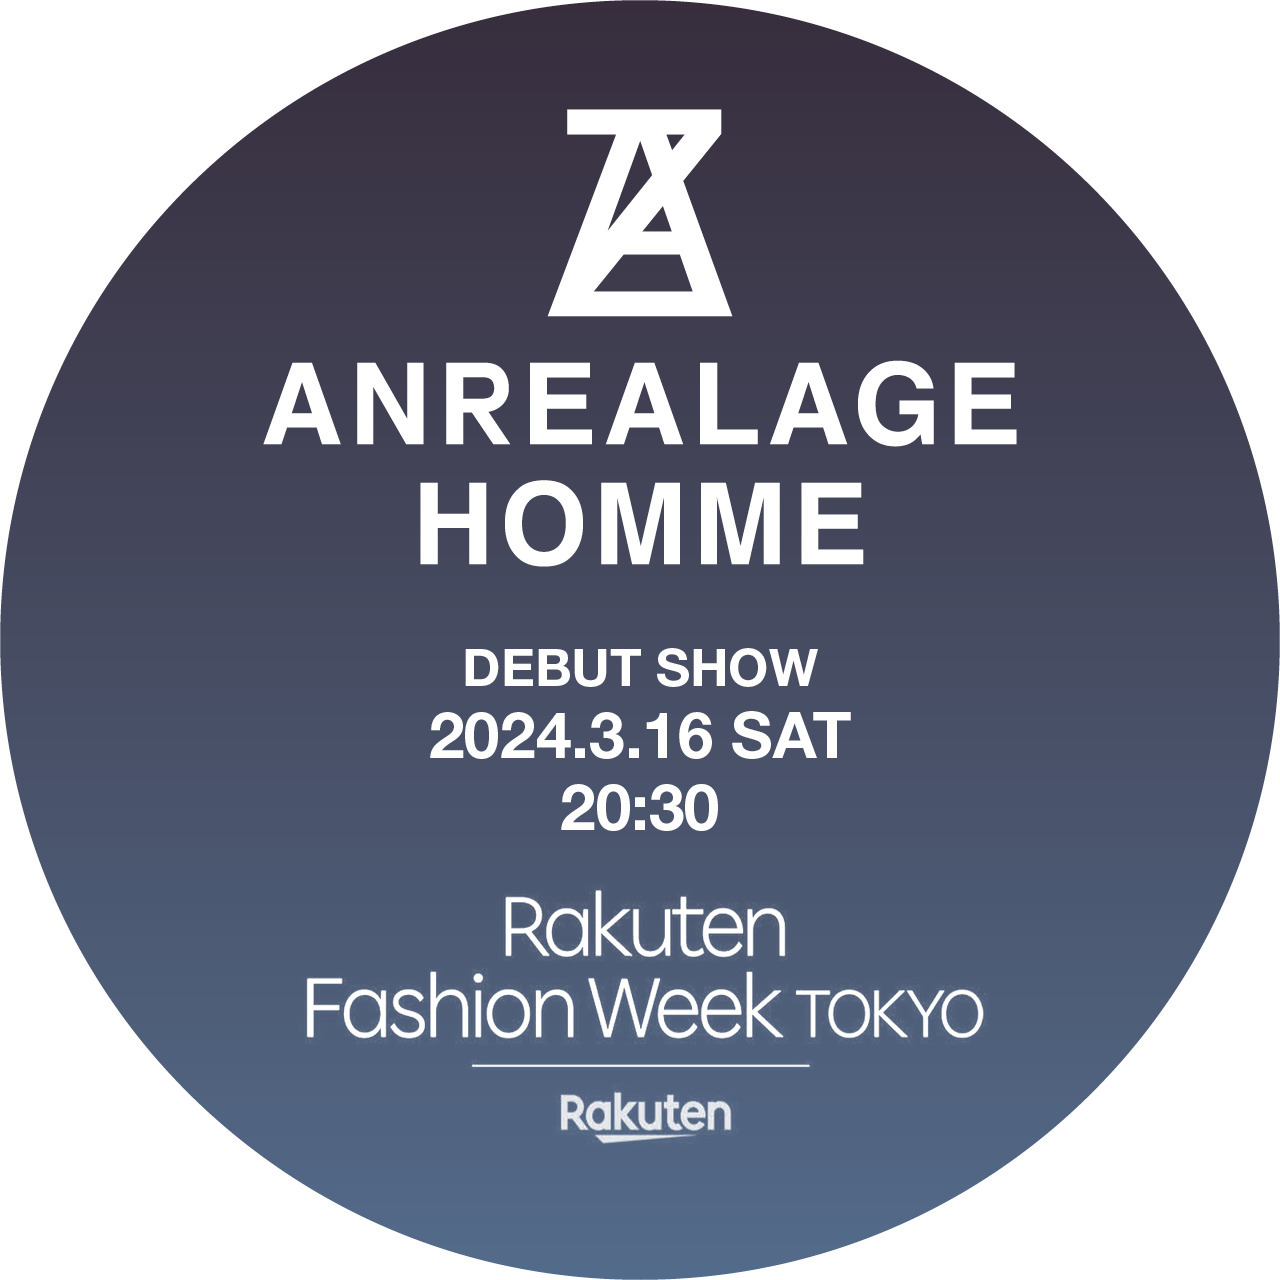 ANREALAGE HOMME